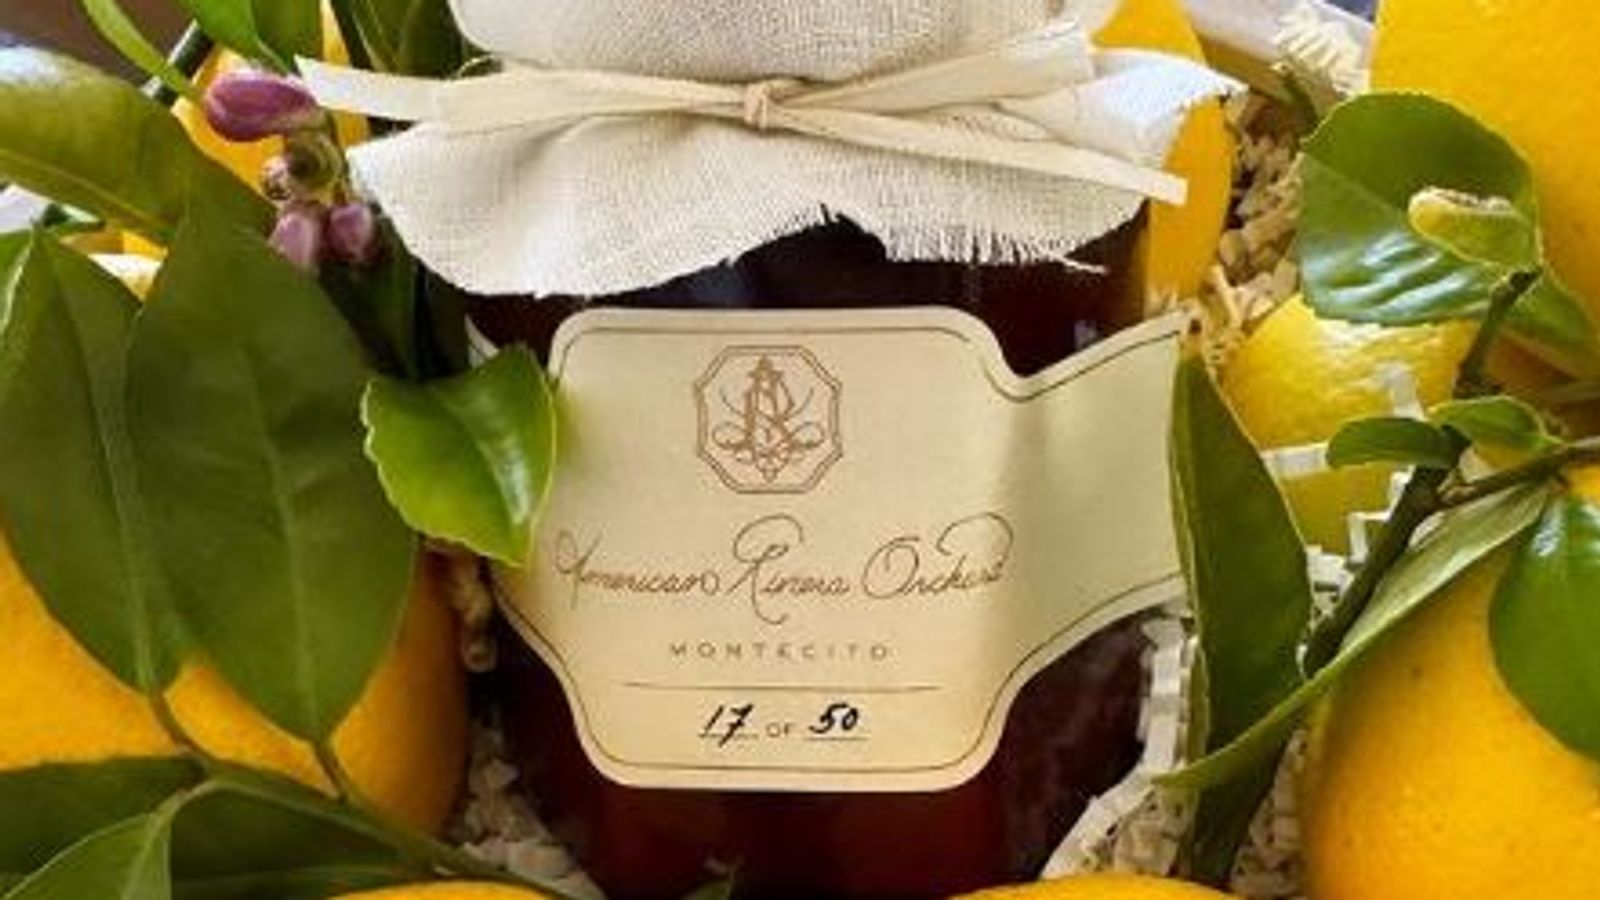 Meghan: Jam the first product released from Duchess of Sussex's new lifestyle brand American Riviera Orchard